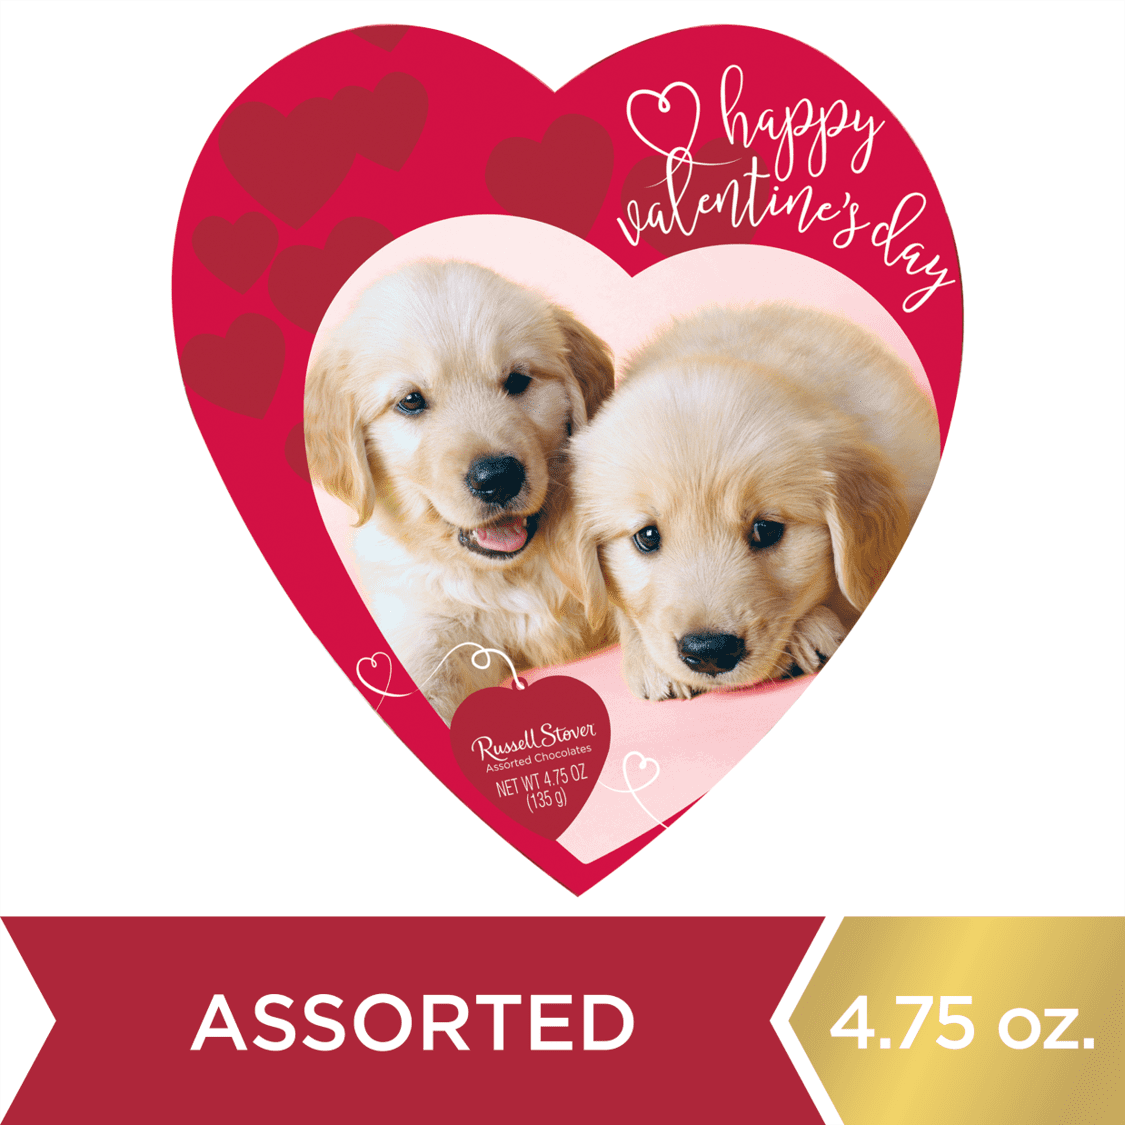 Russell Stover Valentine's Day Puppy Heart Assorted Milk & Dark Chocolate Gift Box, 3.1 oz. (5 Pieces)